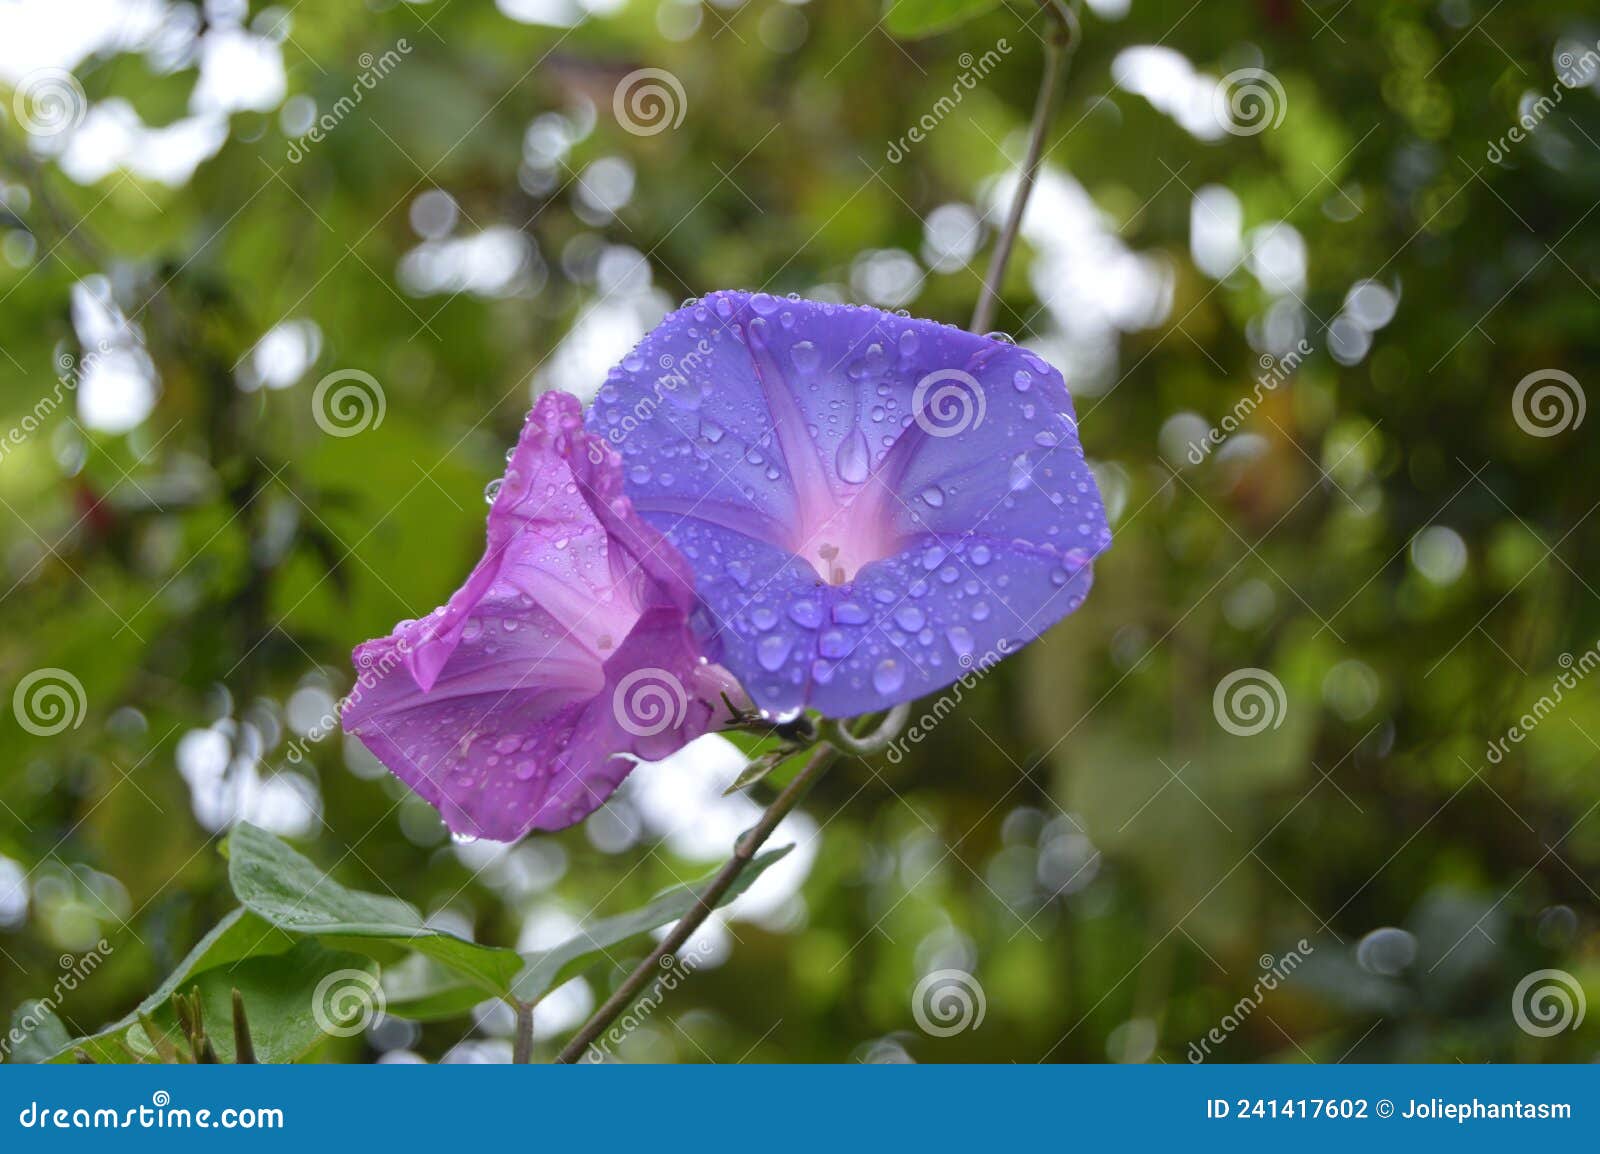 morning glory or  ipomoea indica purple /violet flowers with green leaves and water rain drops. bokeh effect